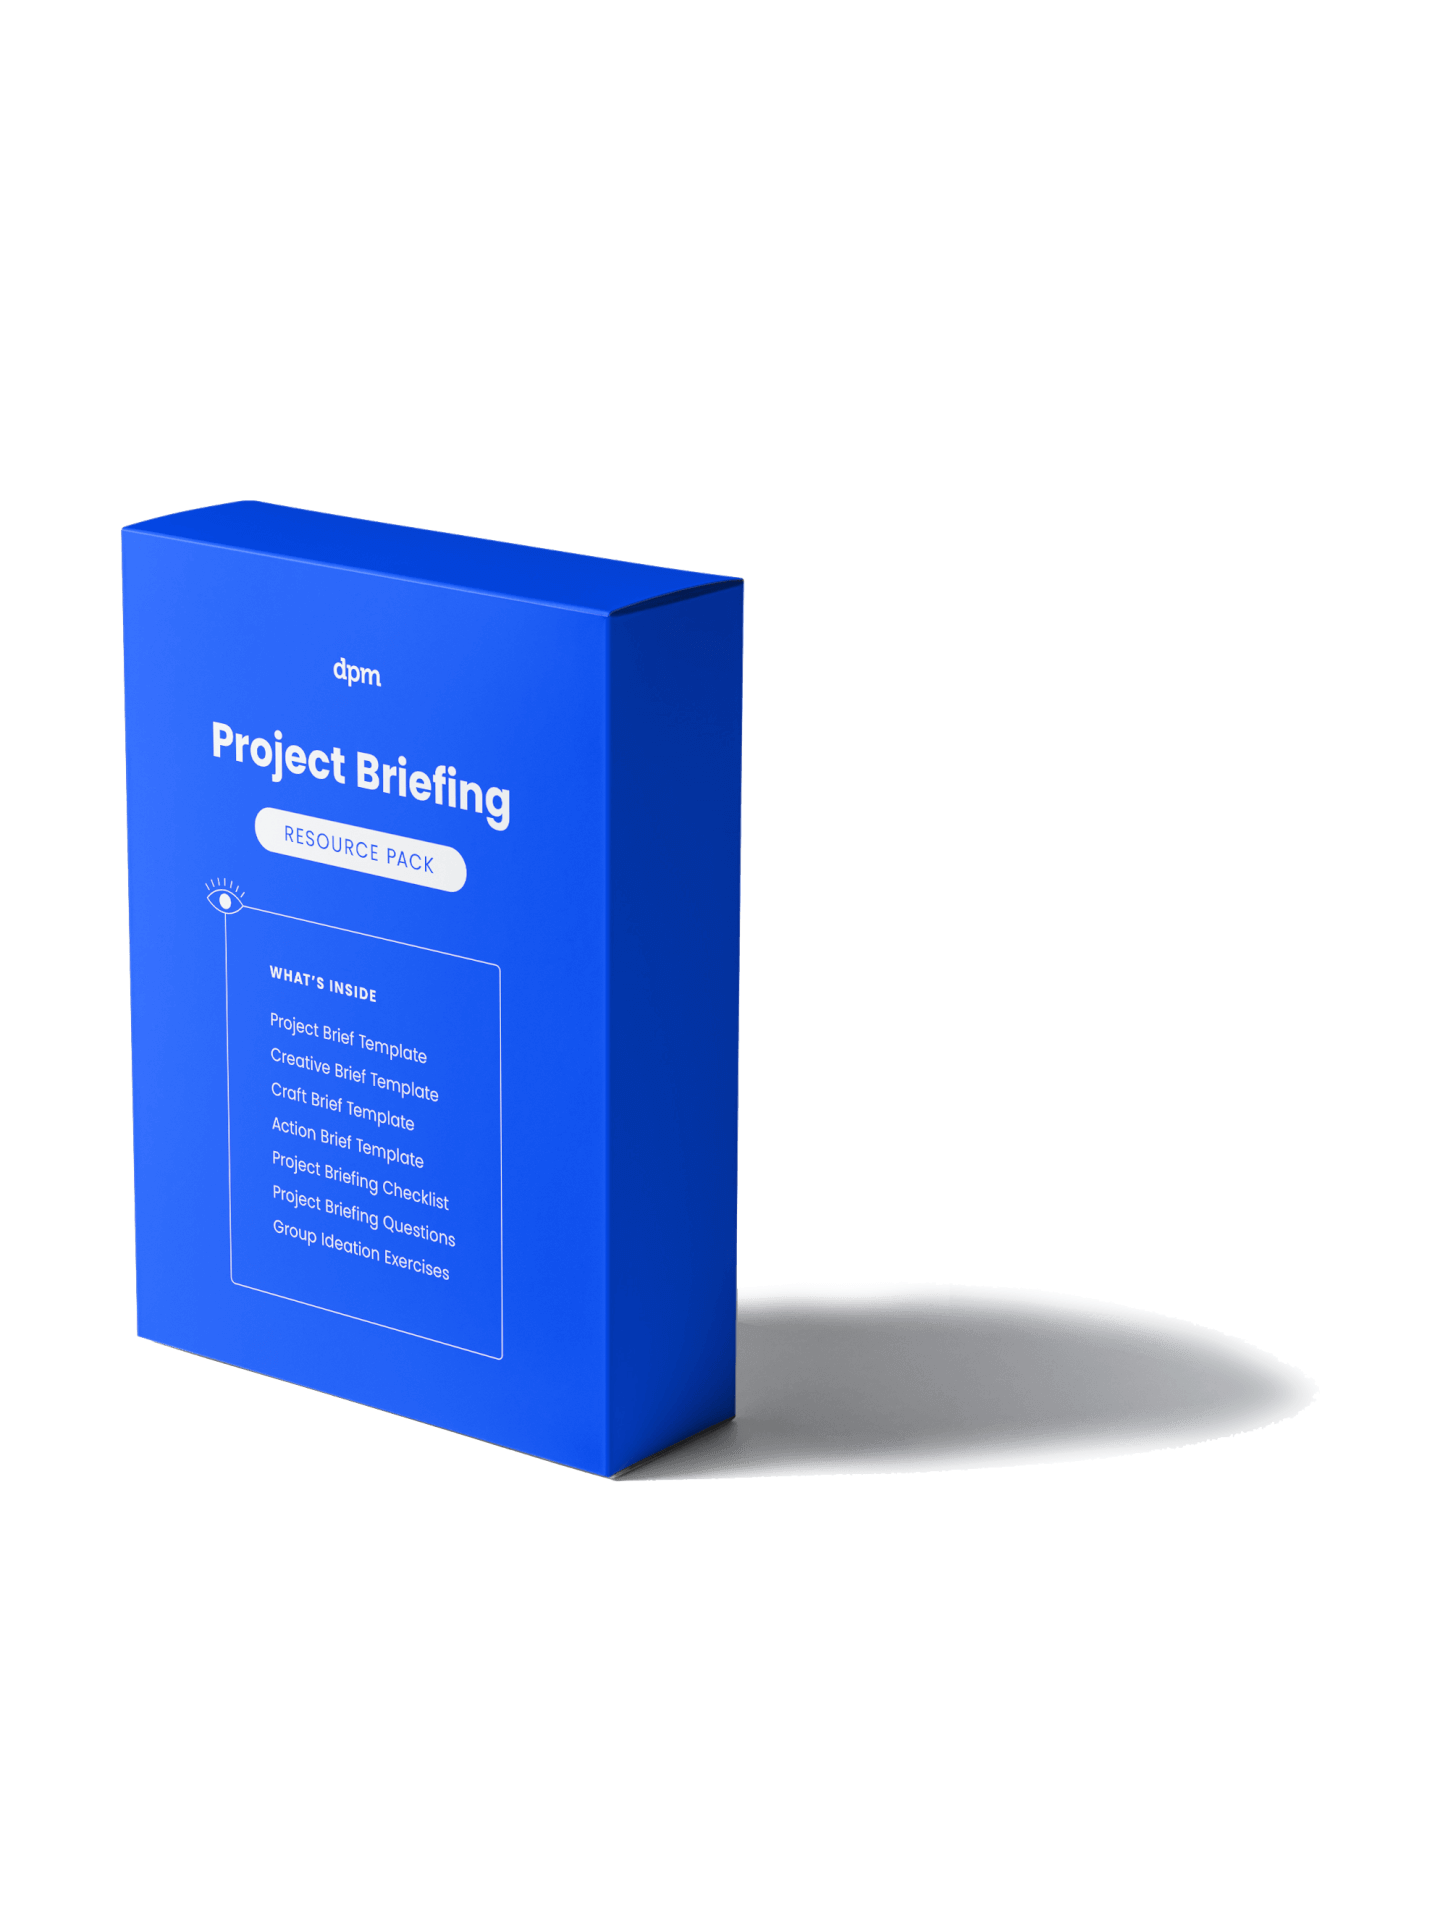 Project-Briefing-Resource-Pack-mock-up-3-by-4